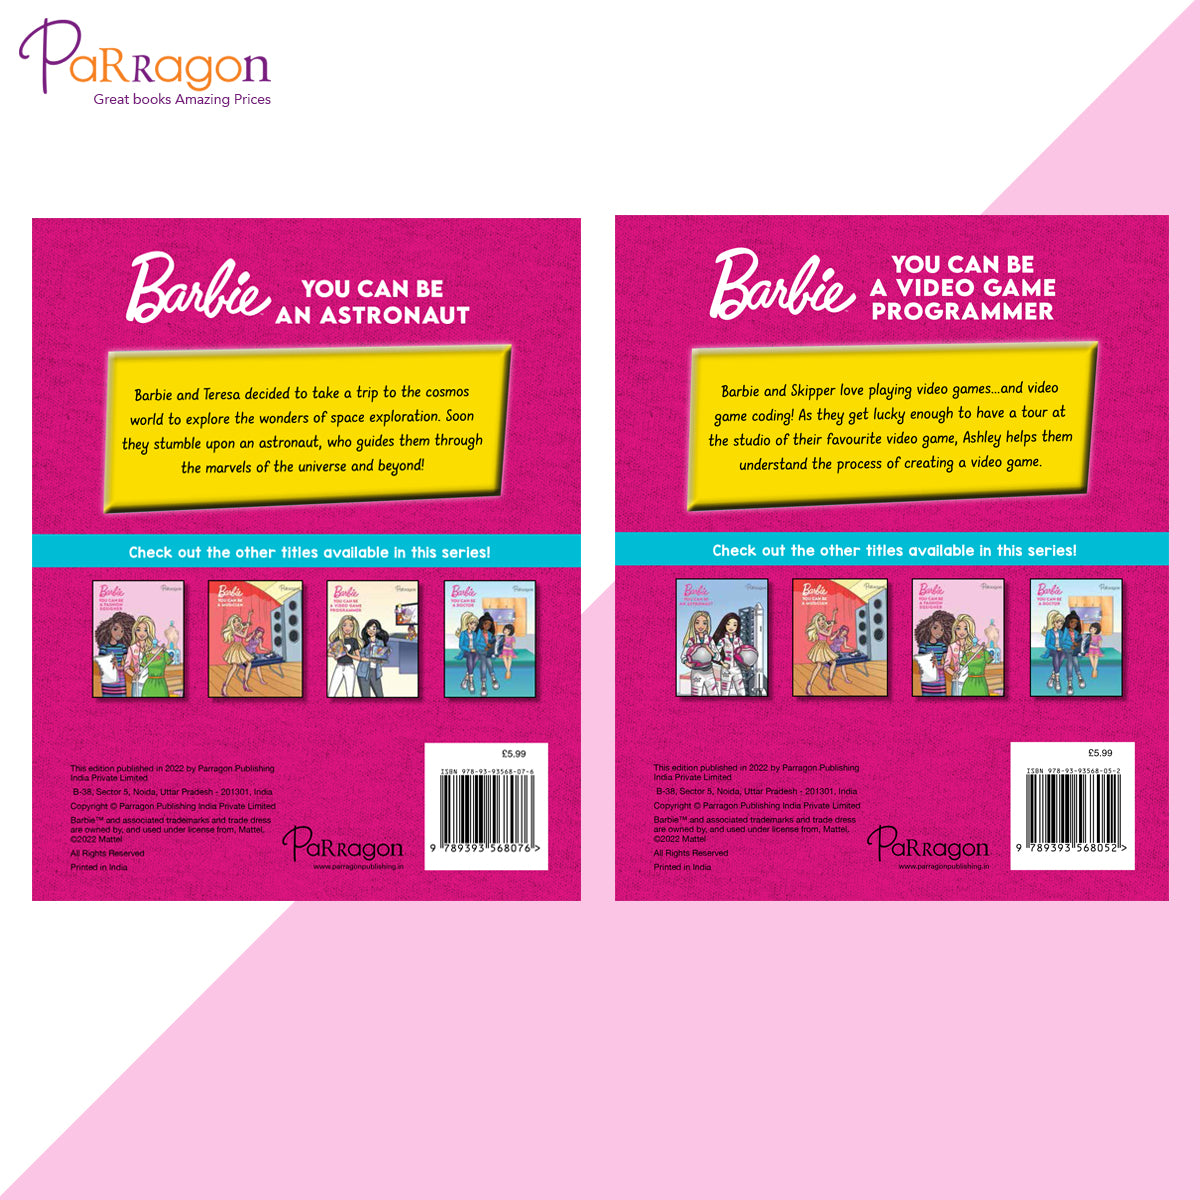 Barbie You Can Be (Set of 2 books) Hardcover [Hardcover] Parragon